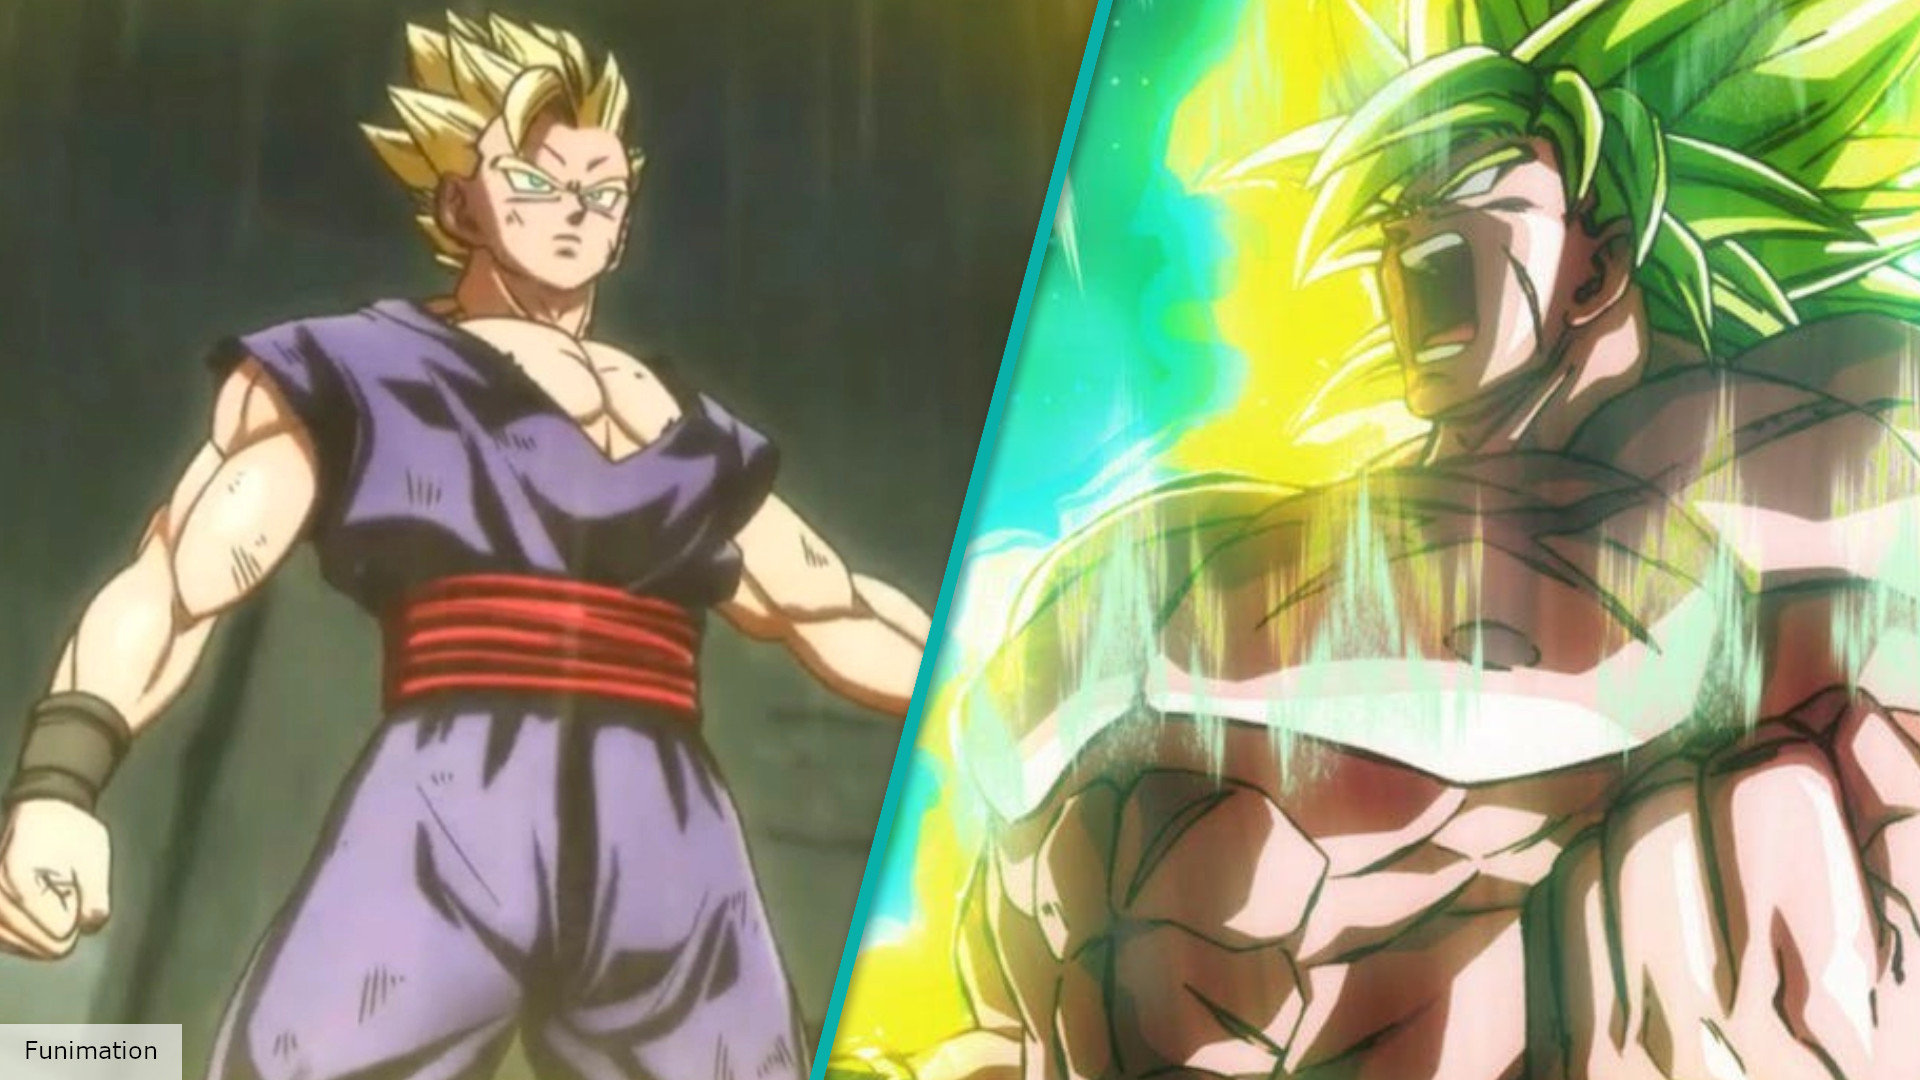 Dragon Ball Super: Super Hero takes place after Broly | The Digital Fix